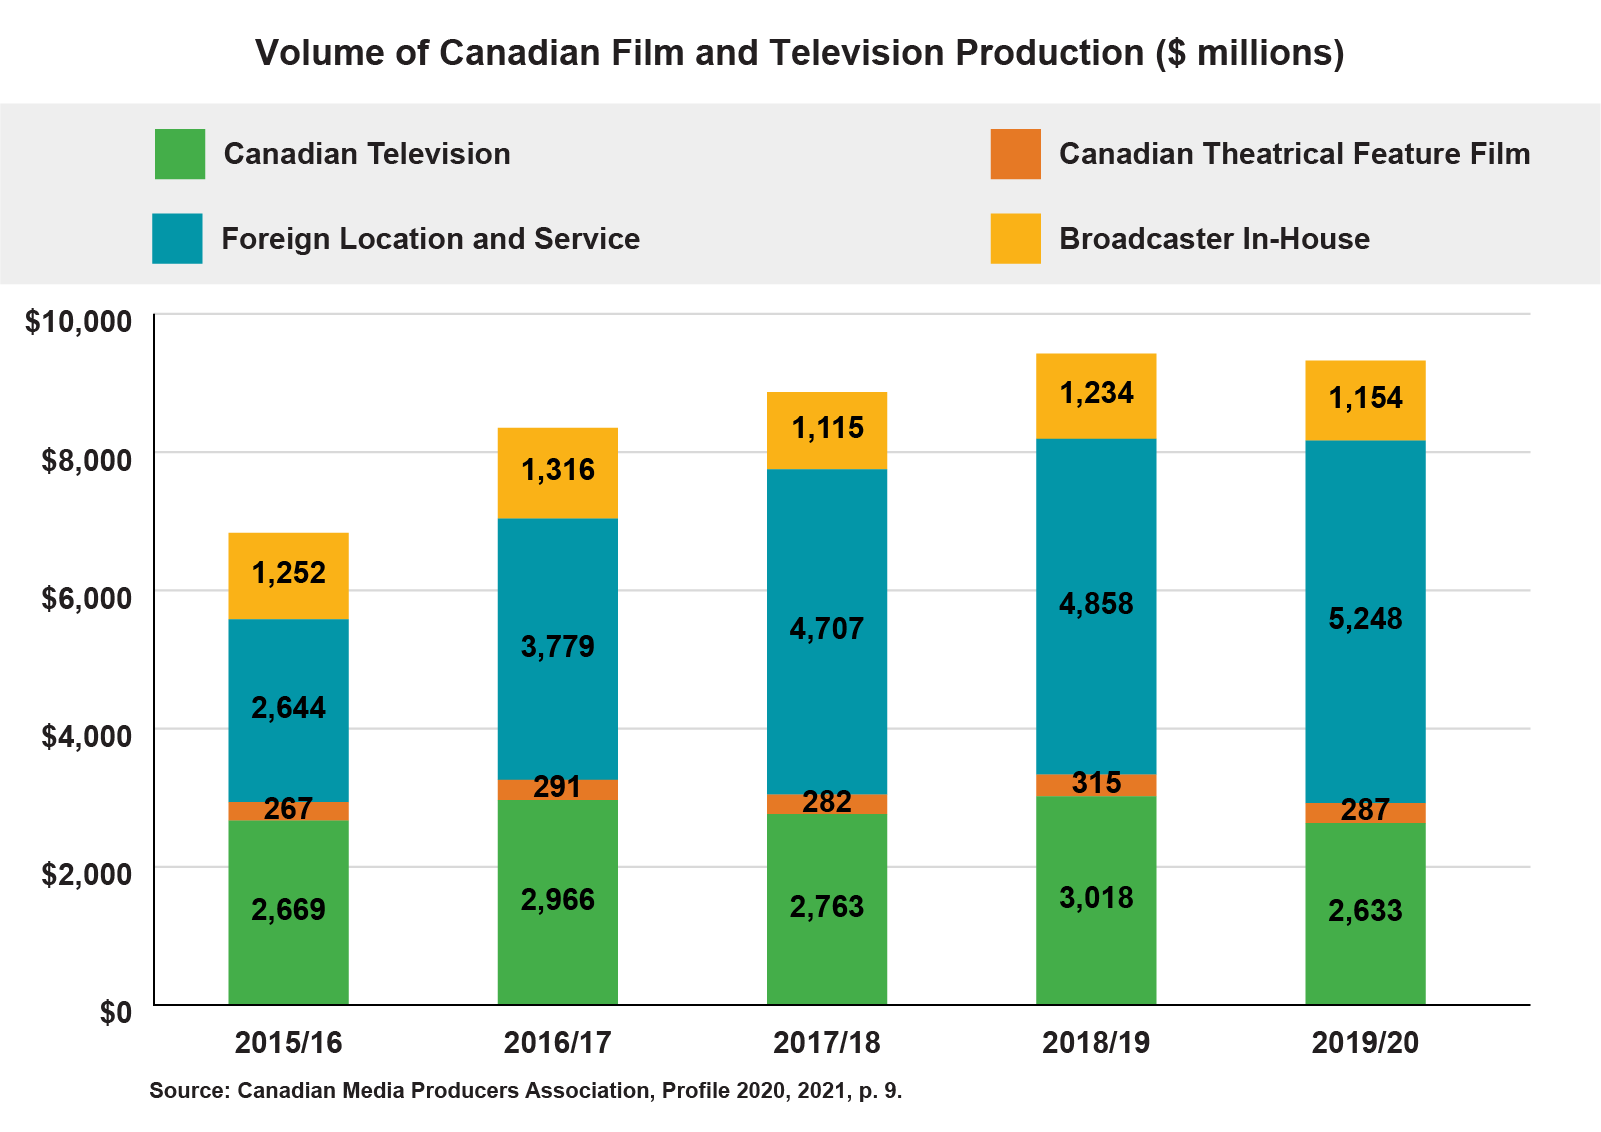 A stacked bar chart showing volume of Canadian film and television production in millions of dollars spanning from the 2015/16 fiscal year to the 2019/20 year. The chart gives data for Canadian television, Canadian theatrical feature film, foreign location and service (FLS), and broadcaster in-house. FLS has had the greatest volume except for in 2015/16 when it was slightly smaller than Canadian television, but has grown substantially since then. Canadian theatrical feature films are the smallest, but are higher in 2018/19 than they have been since 2014/15. Canadian television dropped in 2019/20 to below any previous year.